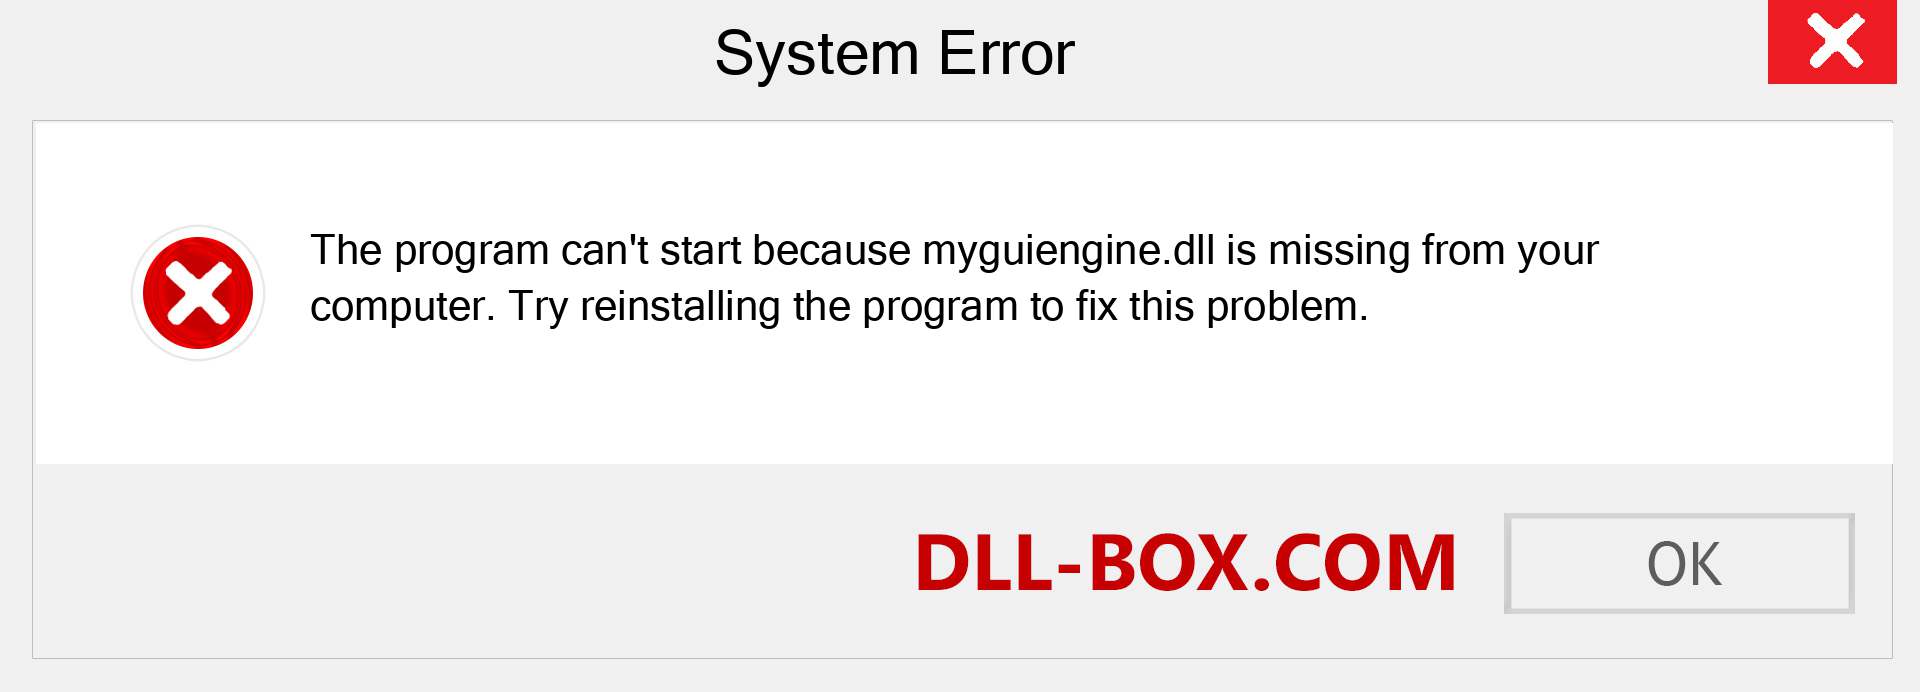  myguiengine.dll file is missing?. Download for Windows 7, 8, 10 - Fix  myguiengine dll Missing Error on Windows, photos, images